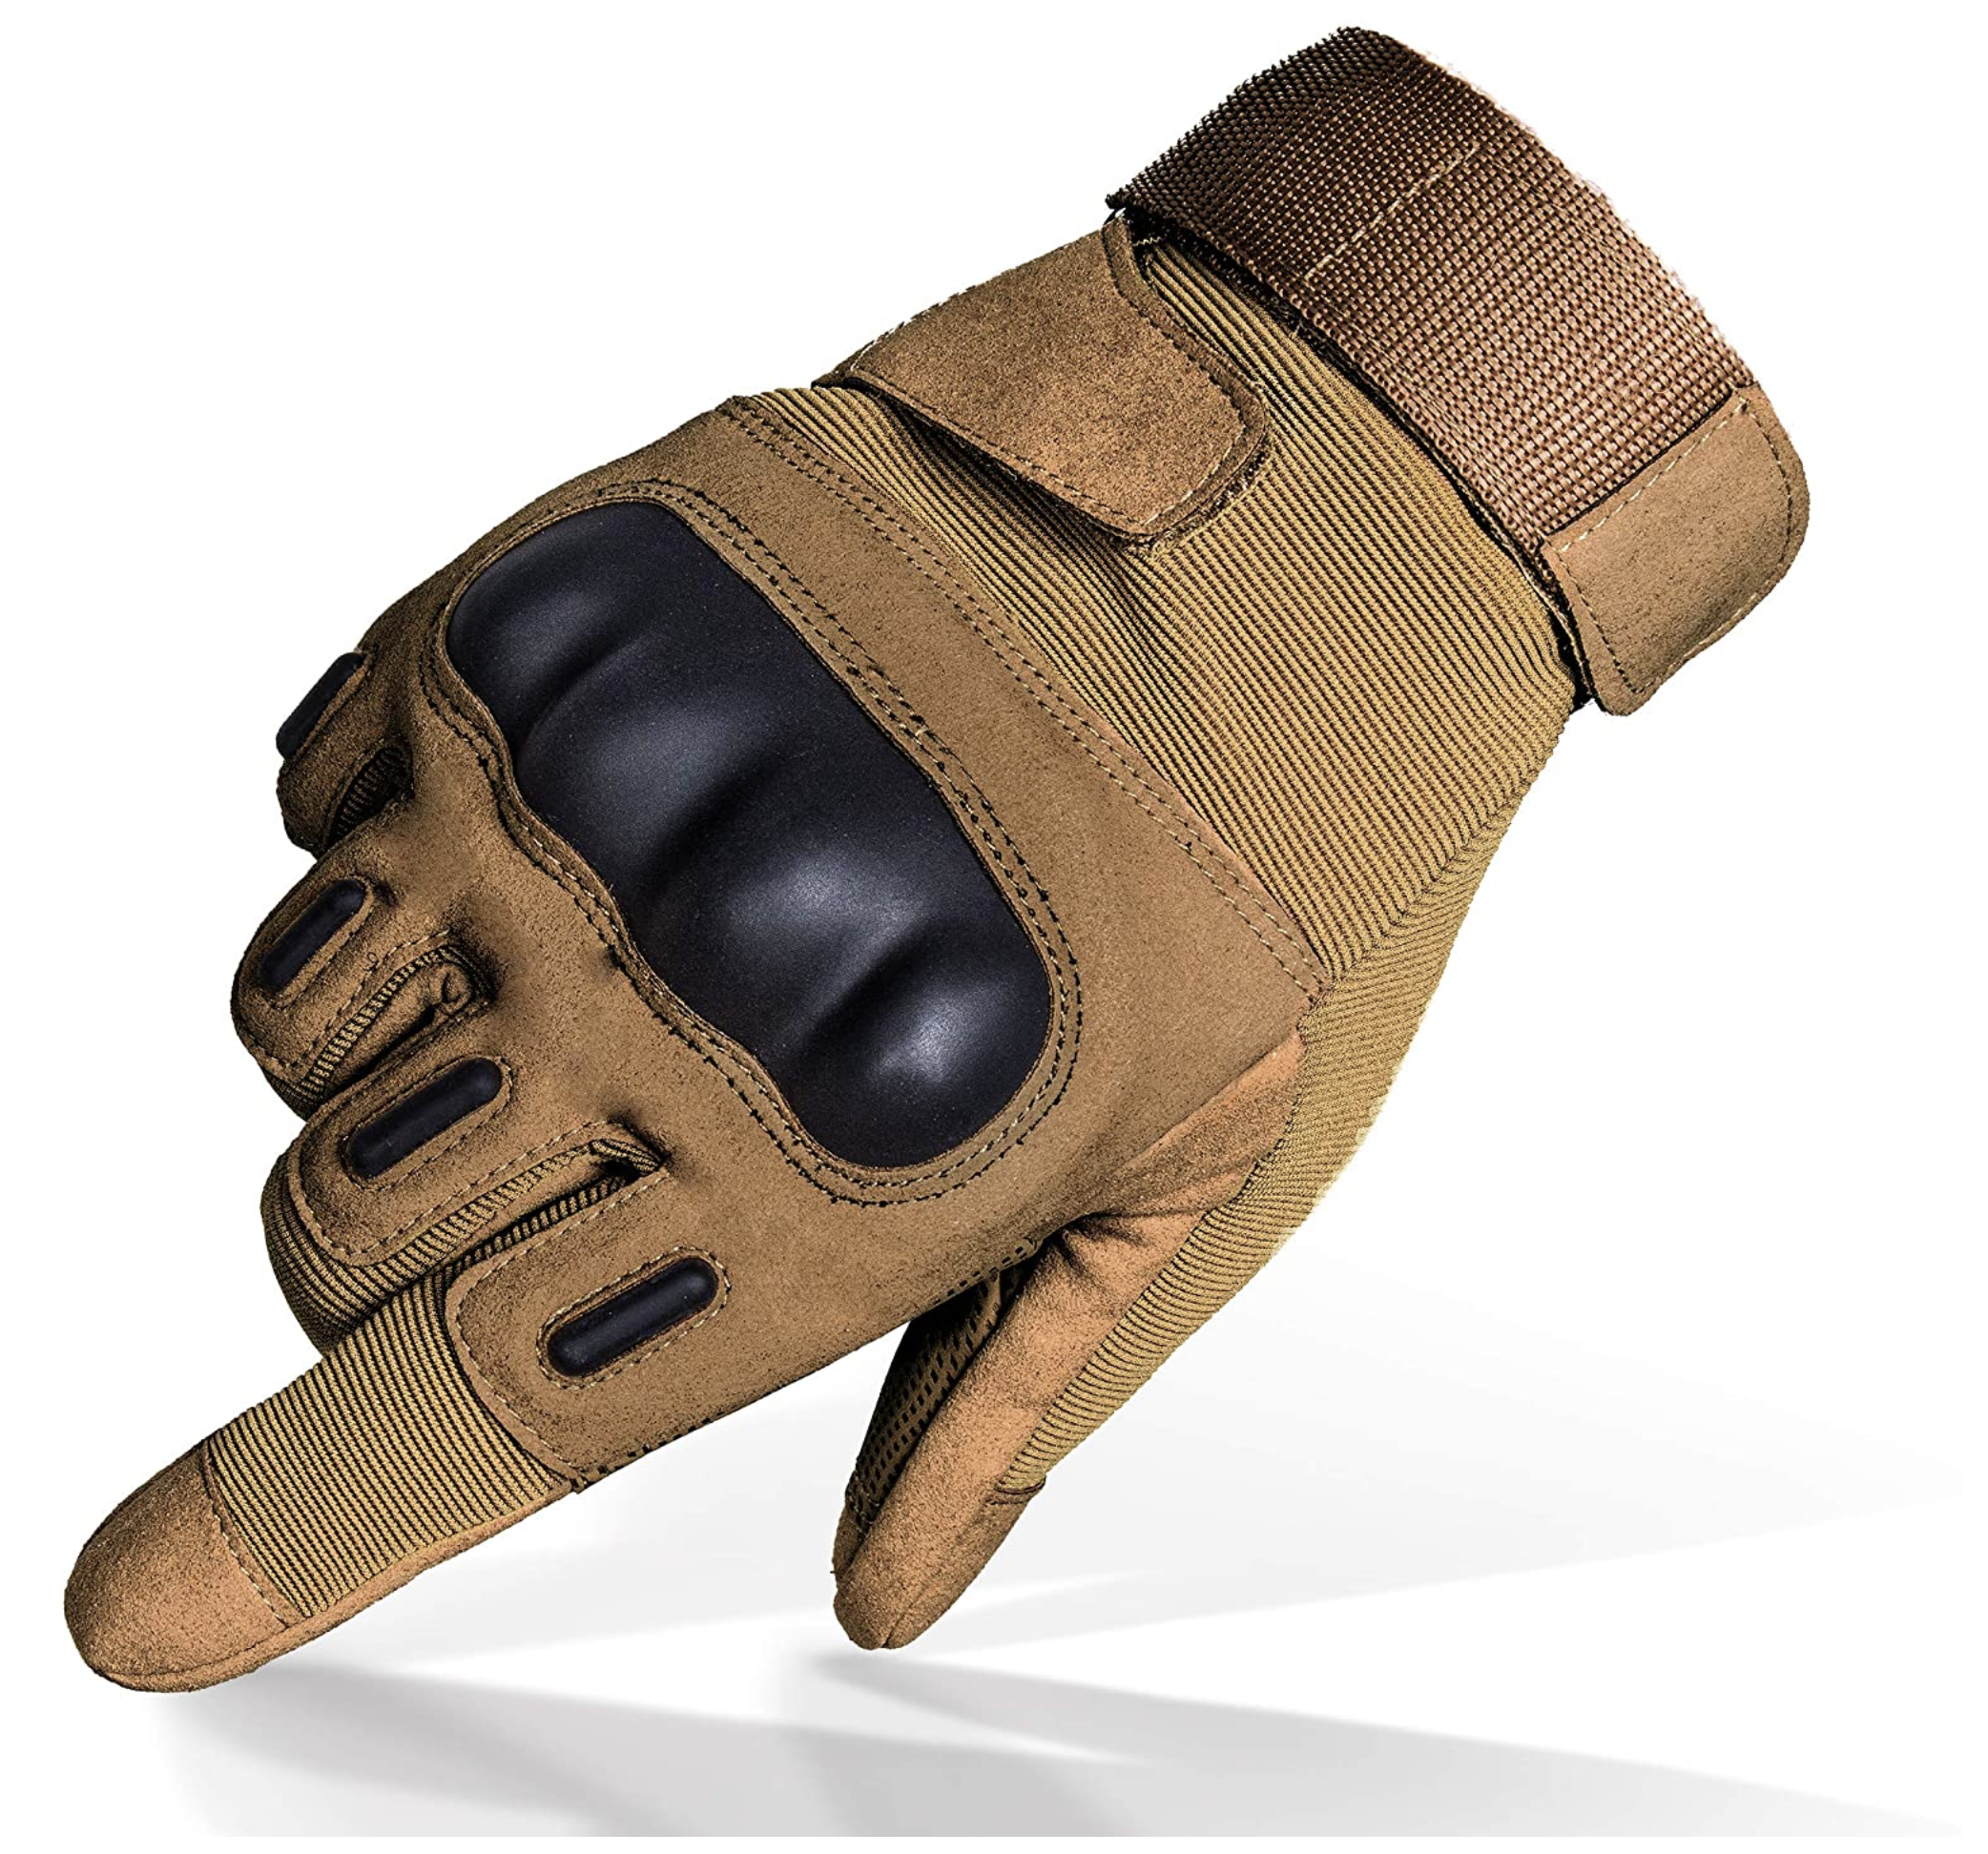 Green, XL TitanOPS Fingerless Hard Knuckle Motorcycle Military Tactical Combat Training Army Shooting Outdoor Gloves 